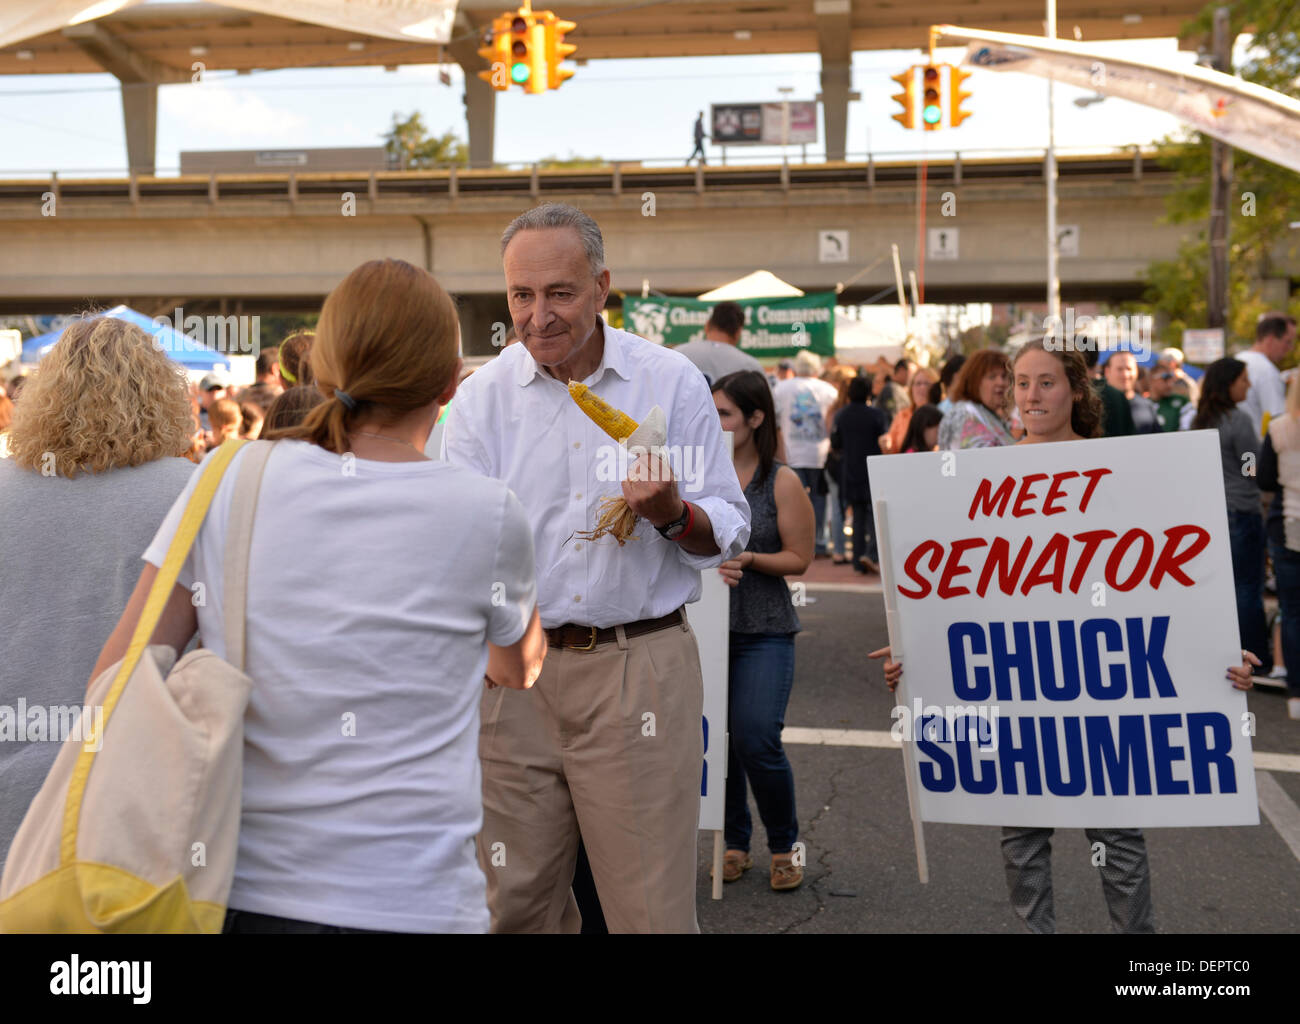 Bellmore, New York, U.S. 22nd September 2013. U.S. Senator CHARLES 'CHUCK' SCHUMER  (Democrat), running for re-election in November, makes a campaign visit at the 27th Annual Bellmore Festival, featuring family fun with exhibits and attractions in a 25 square block area, with over 120,000 people expected to attend over the weekend. Credit:  Ann E Parry/Alamy Live News Stock Photo